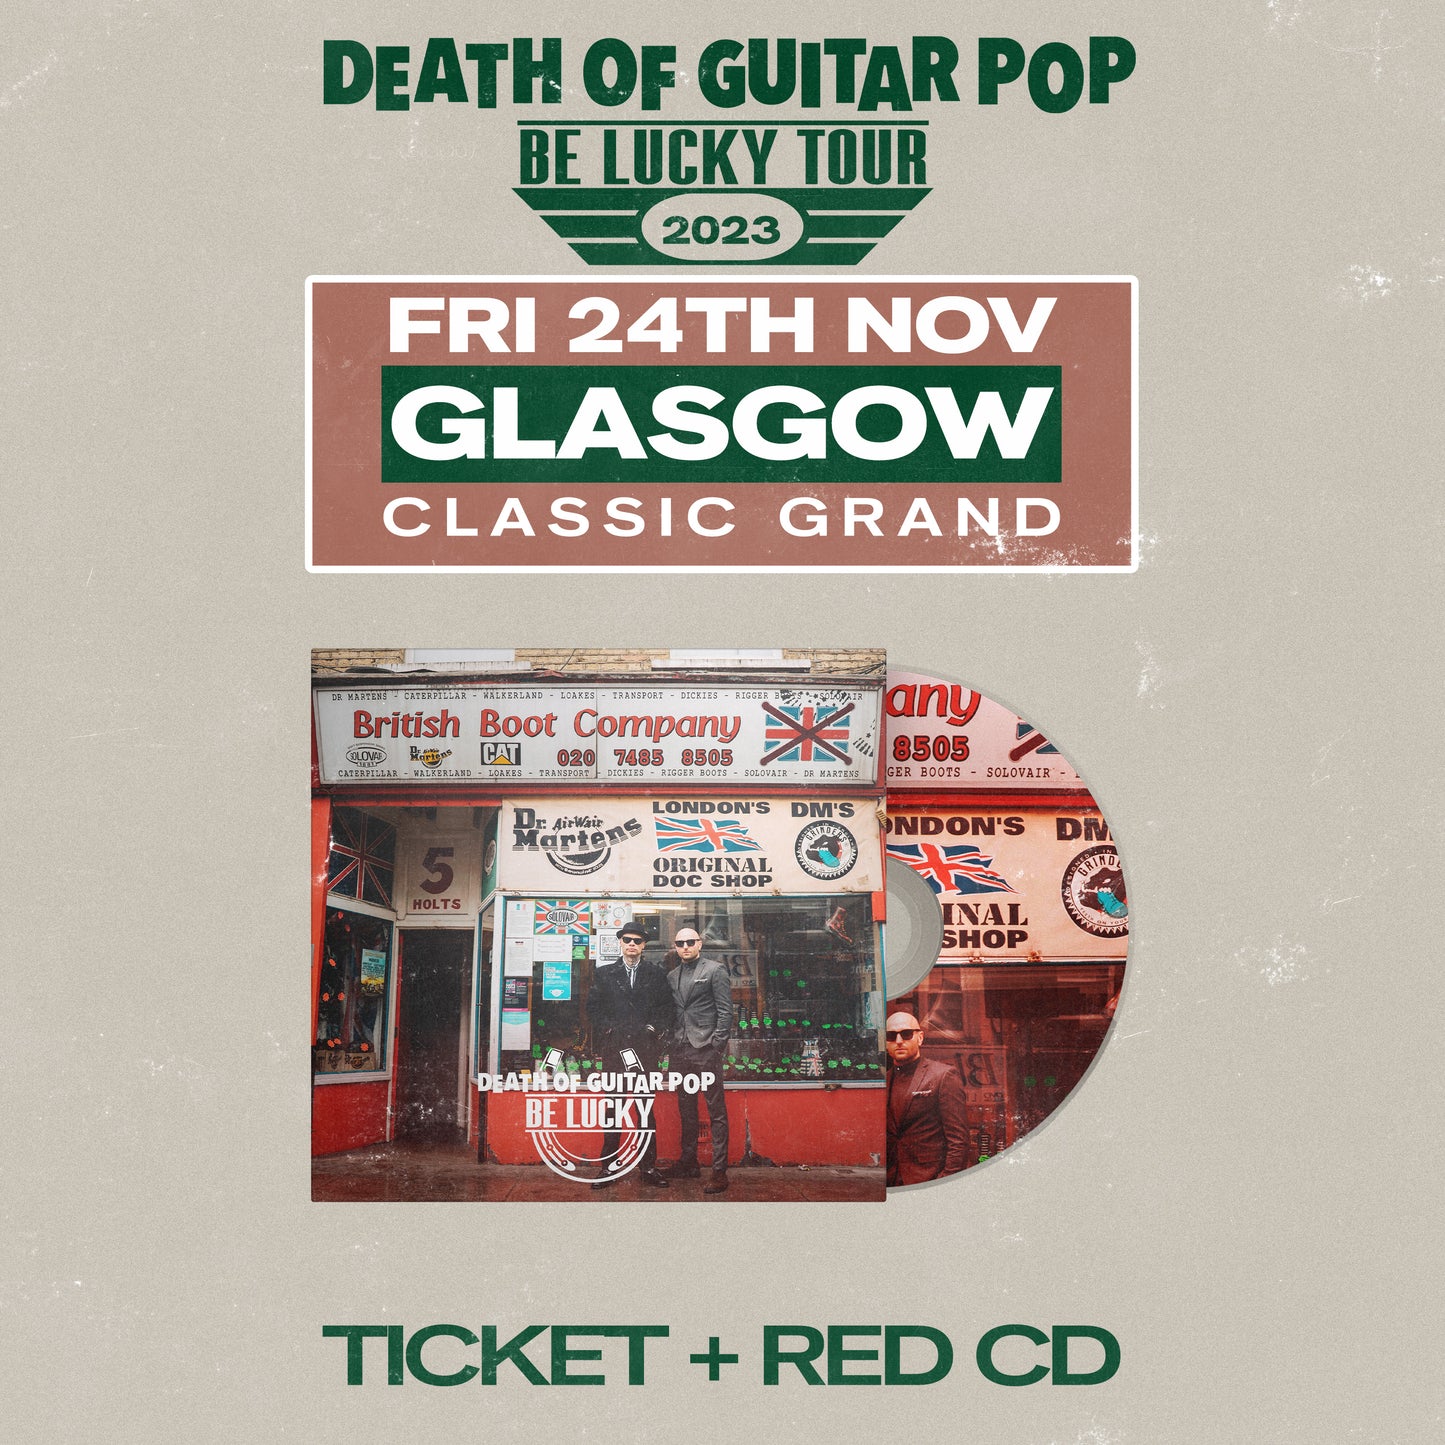 GLASGOW - CLASSIC GRAND 24/11/23 - GENERAL ADMISSION + RED CD BUNDLE